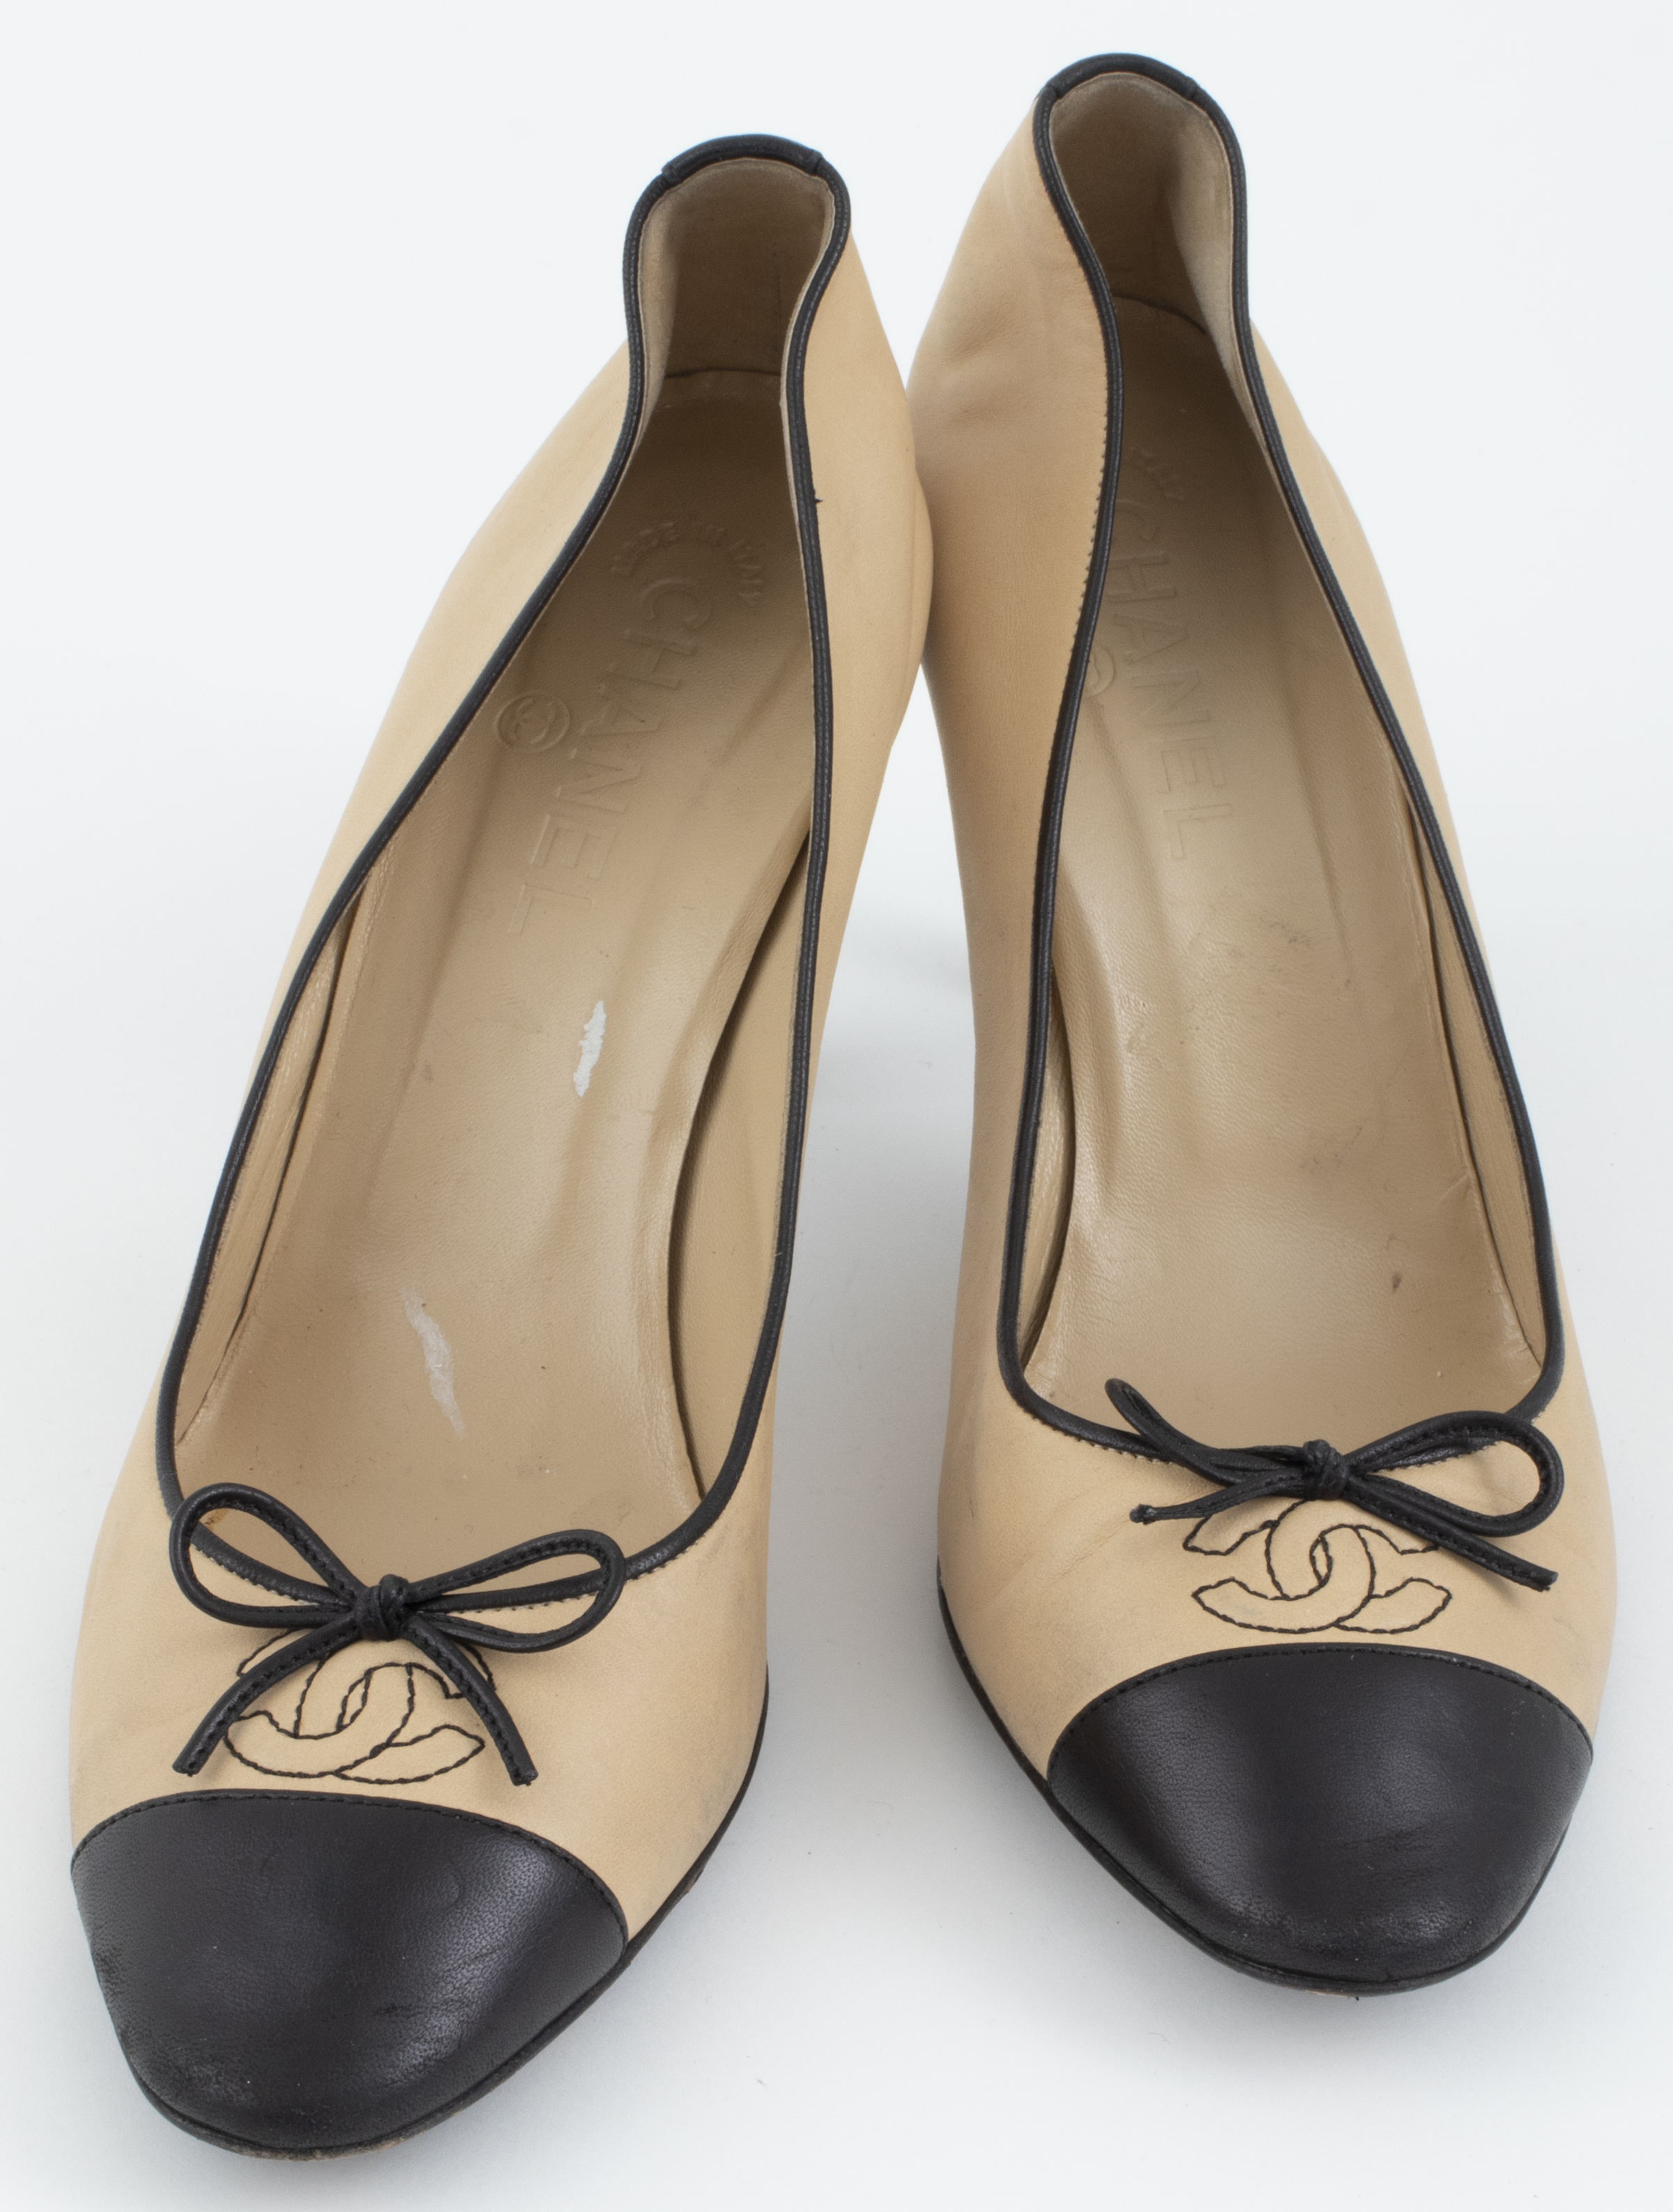 CHANEL BLACK AND TAN LEATHER SHOES,